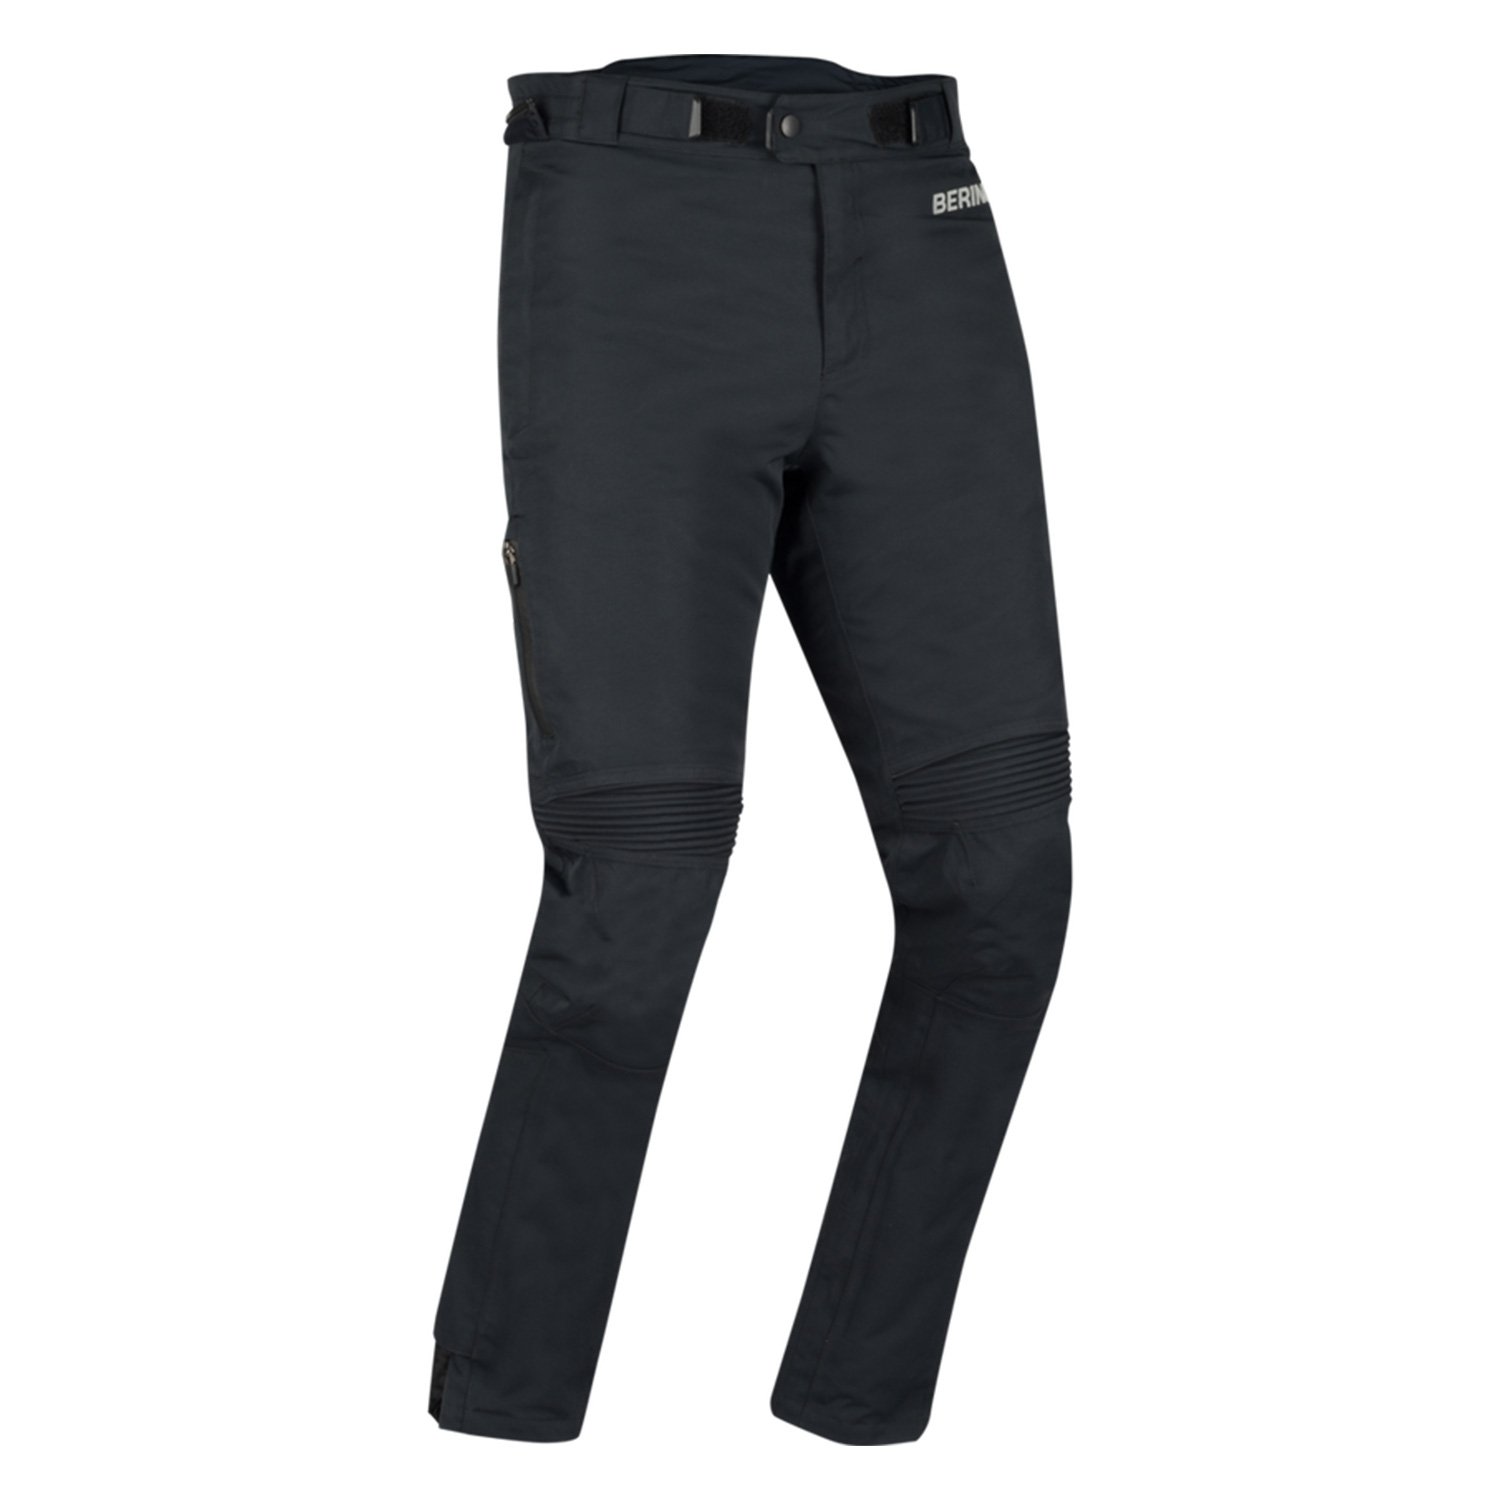 Image of EU Bering Zephyr Trousers Black Taille XL